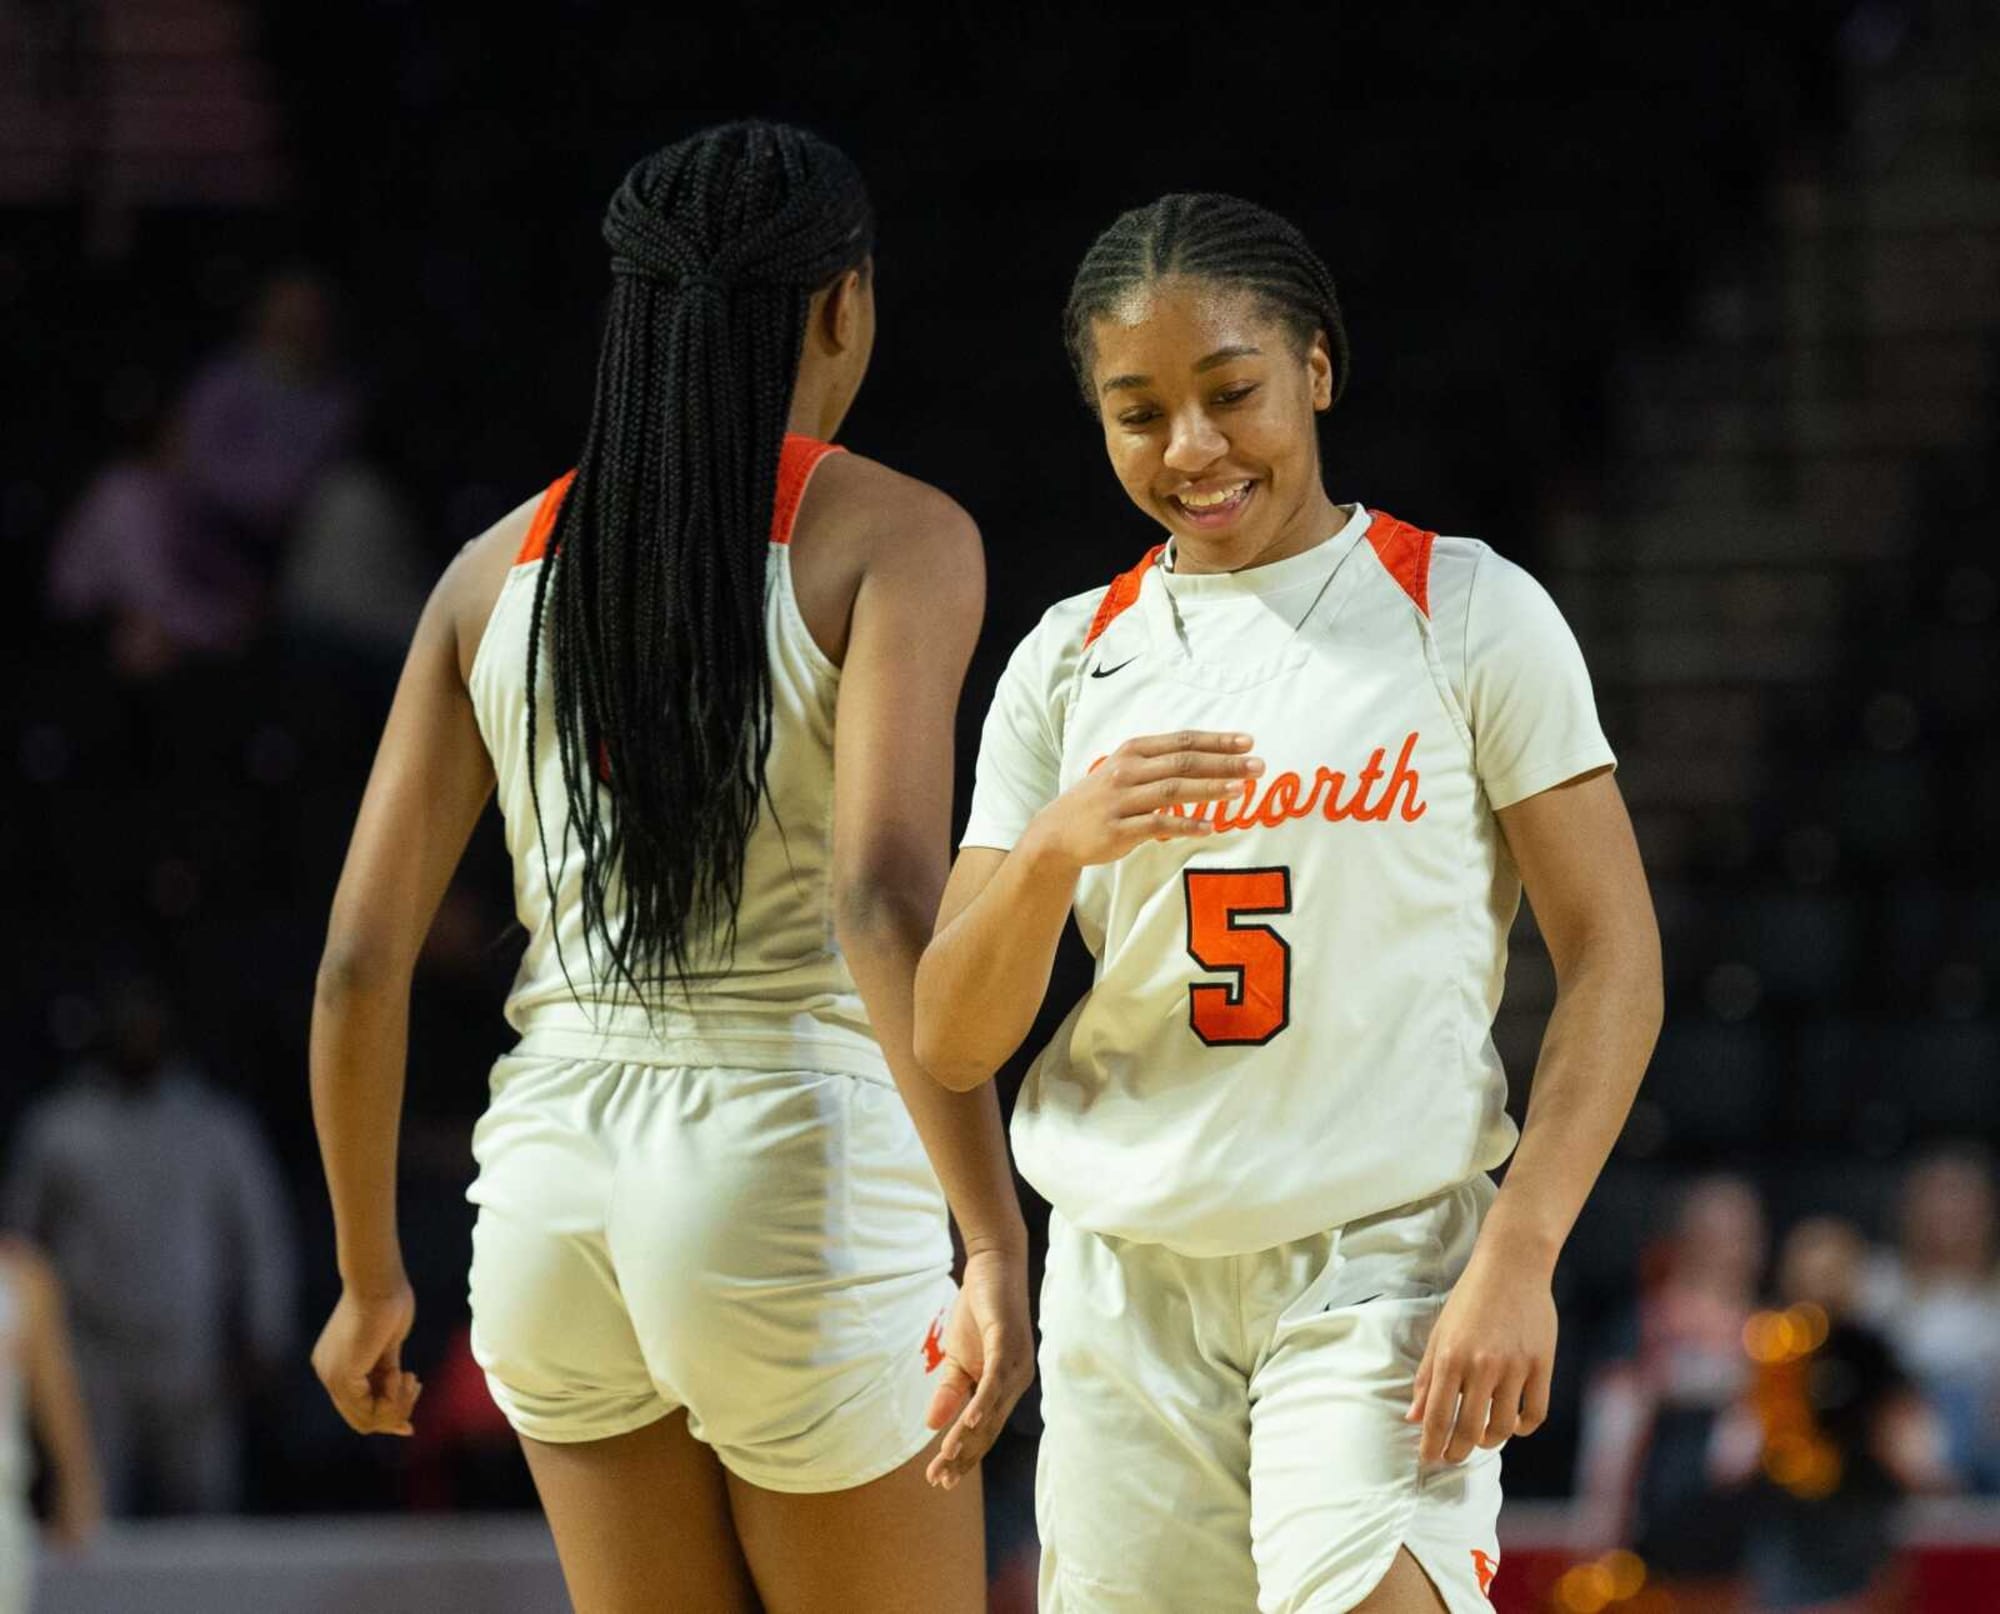 Kennedy Cambridge was on campus visiting Louisville women’s basketball